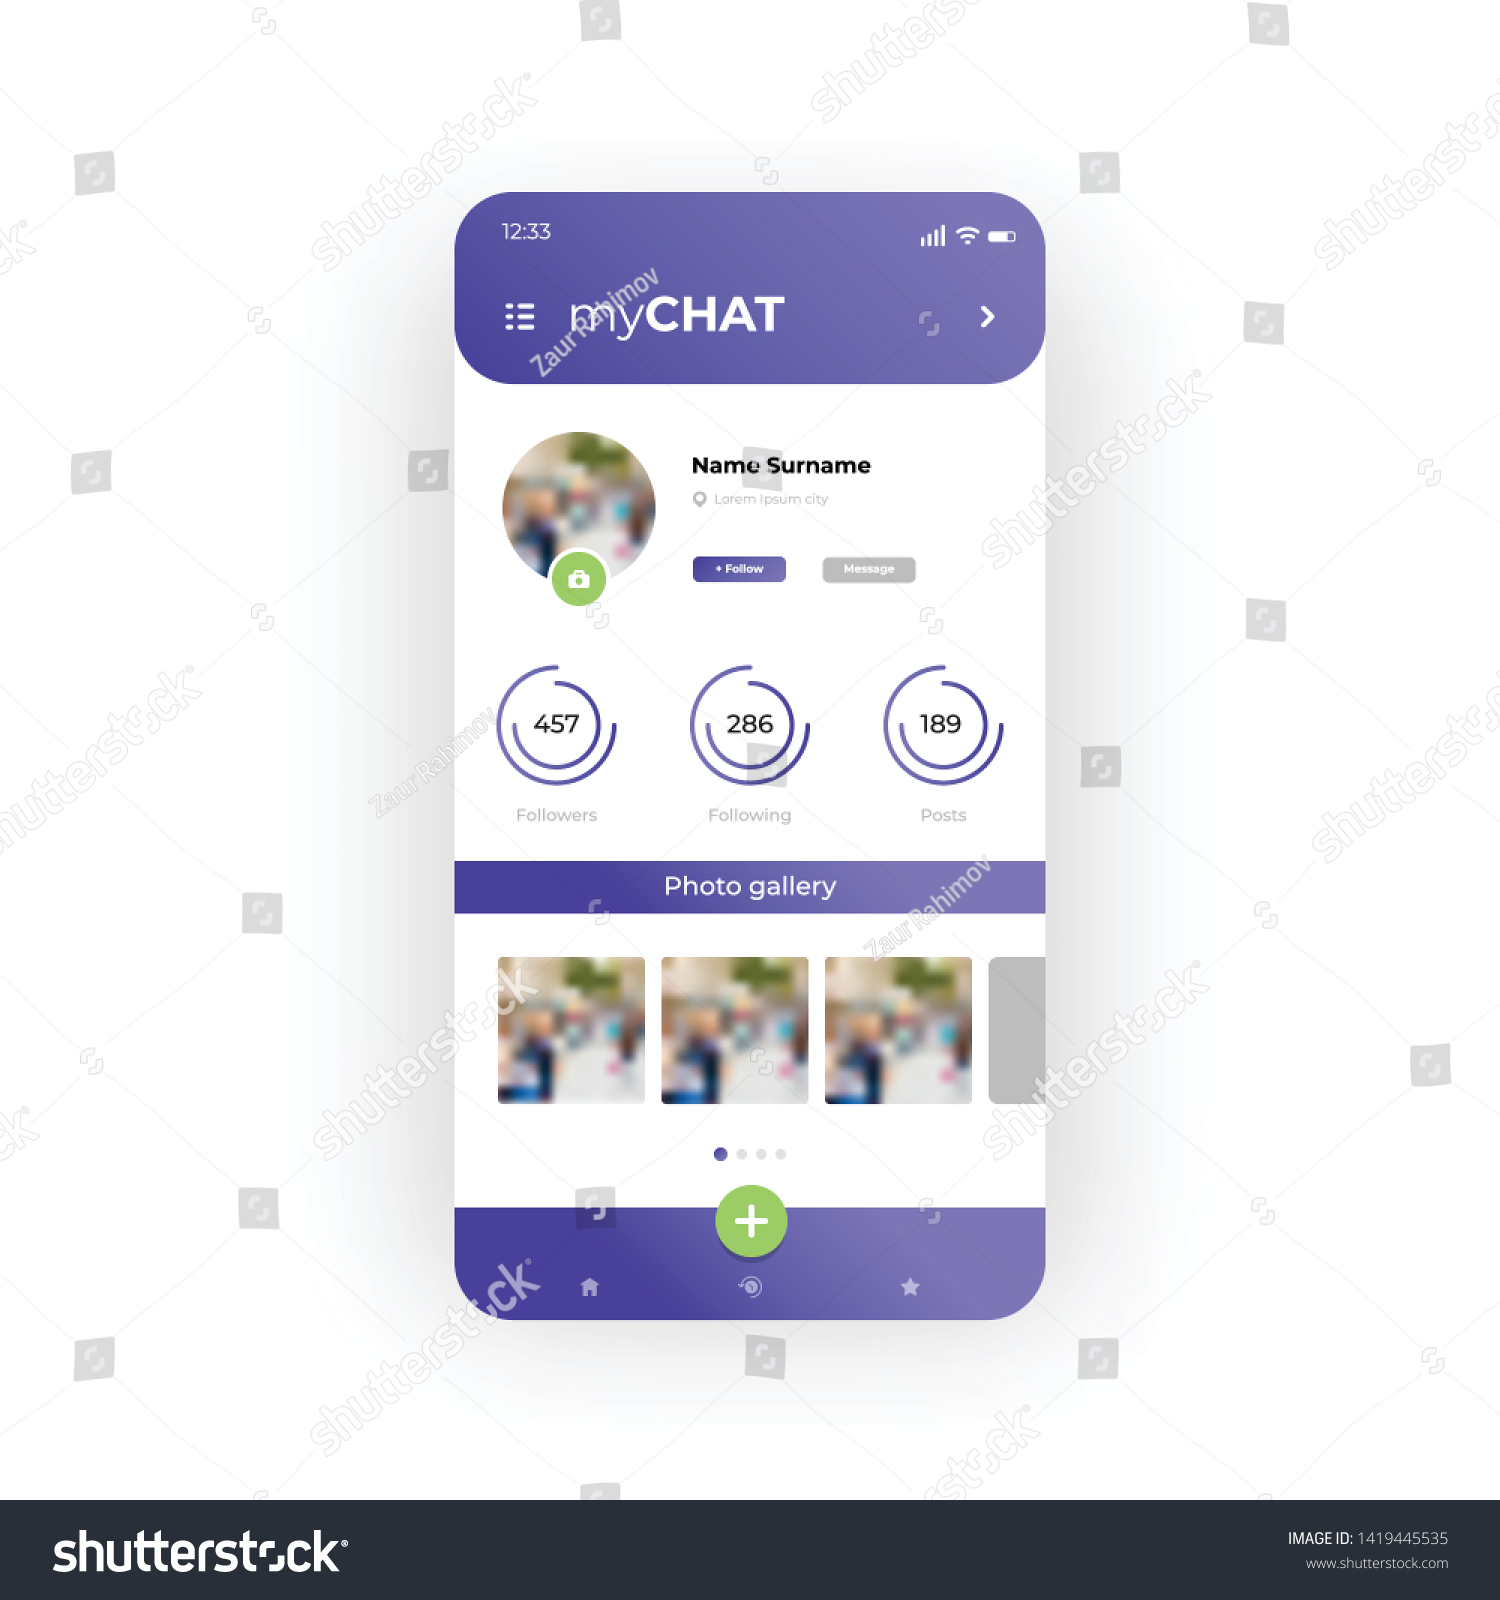 Gallery chat